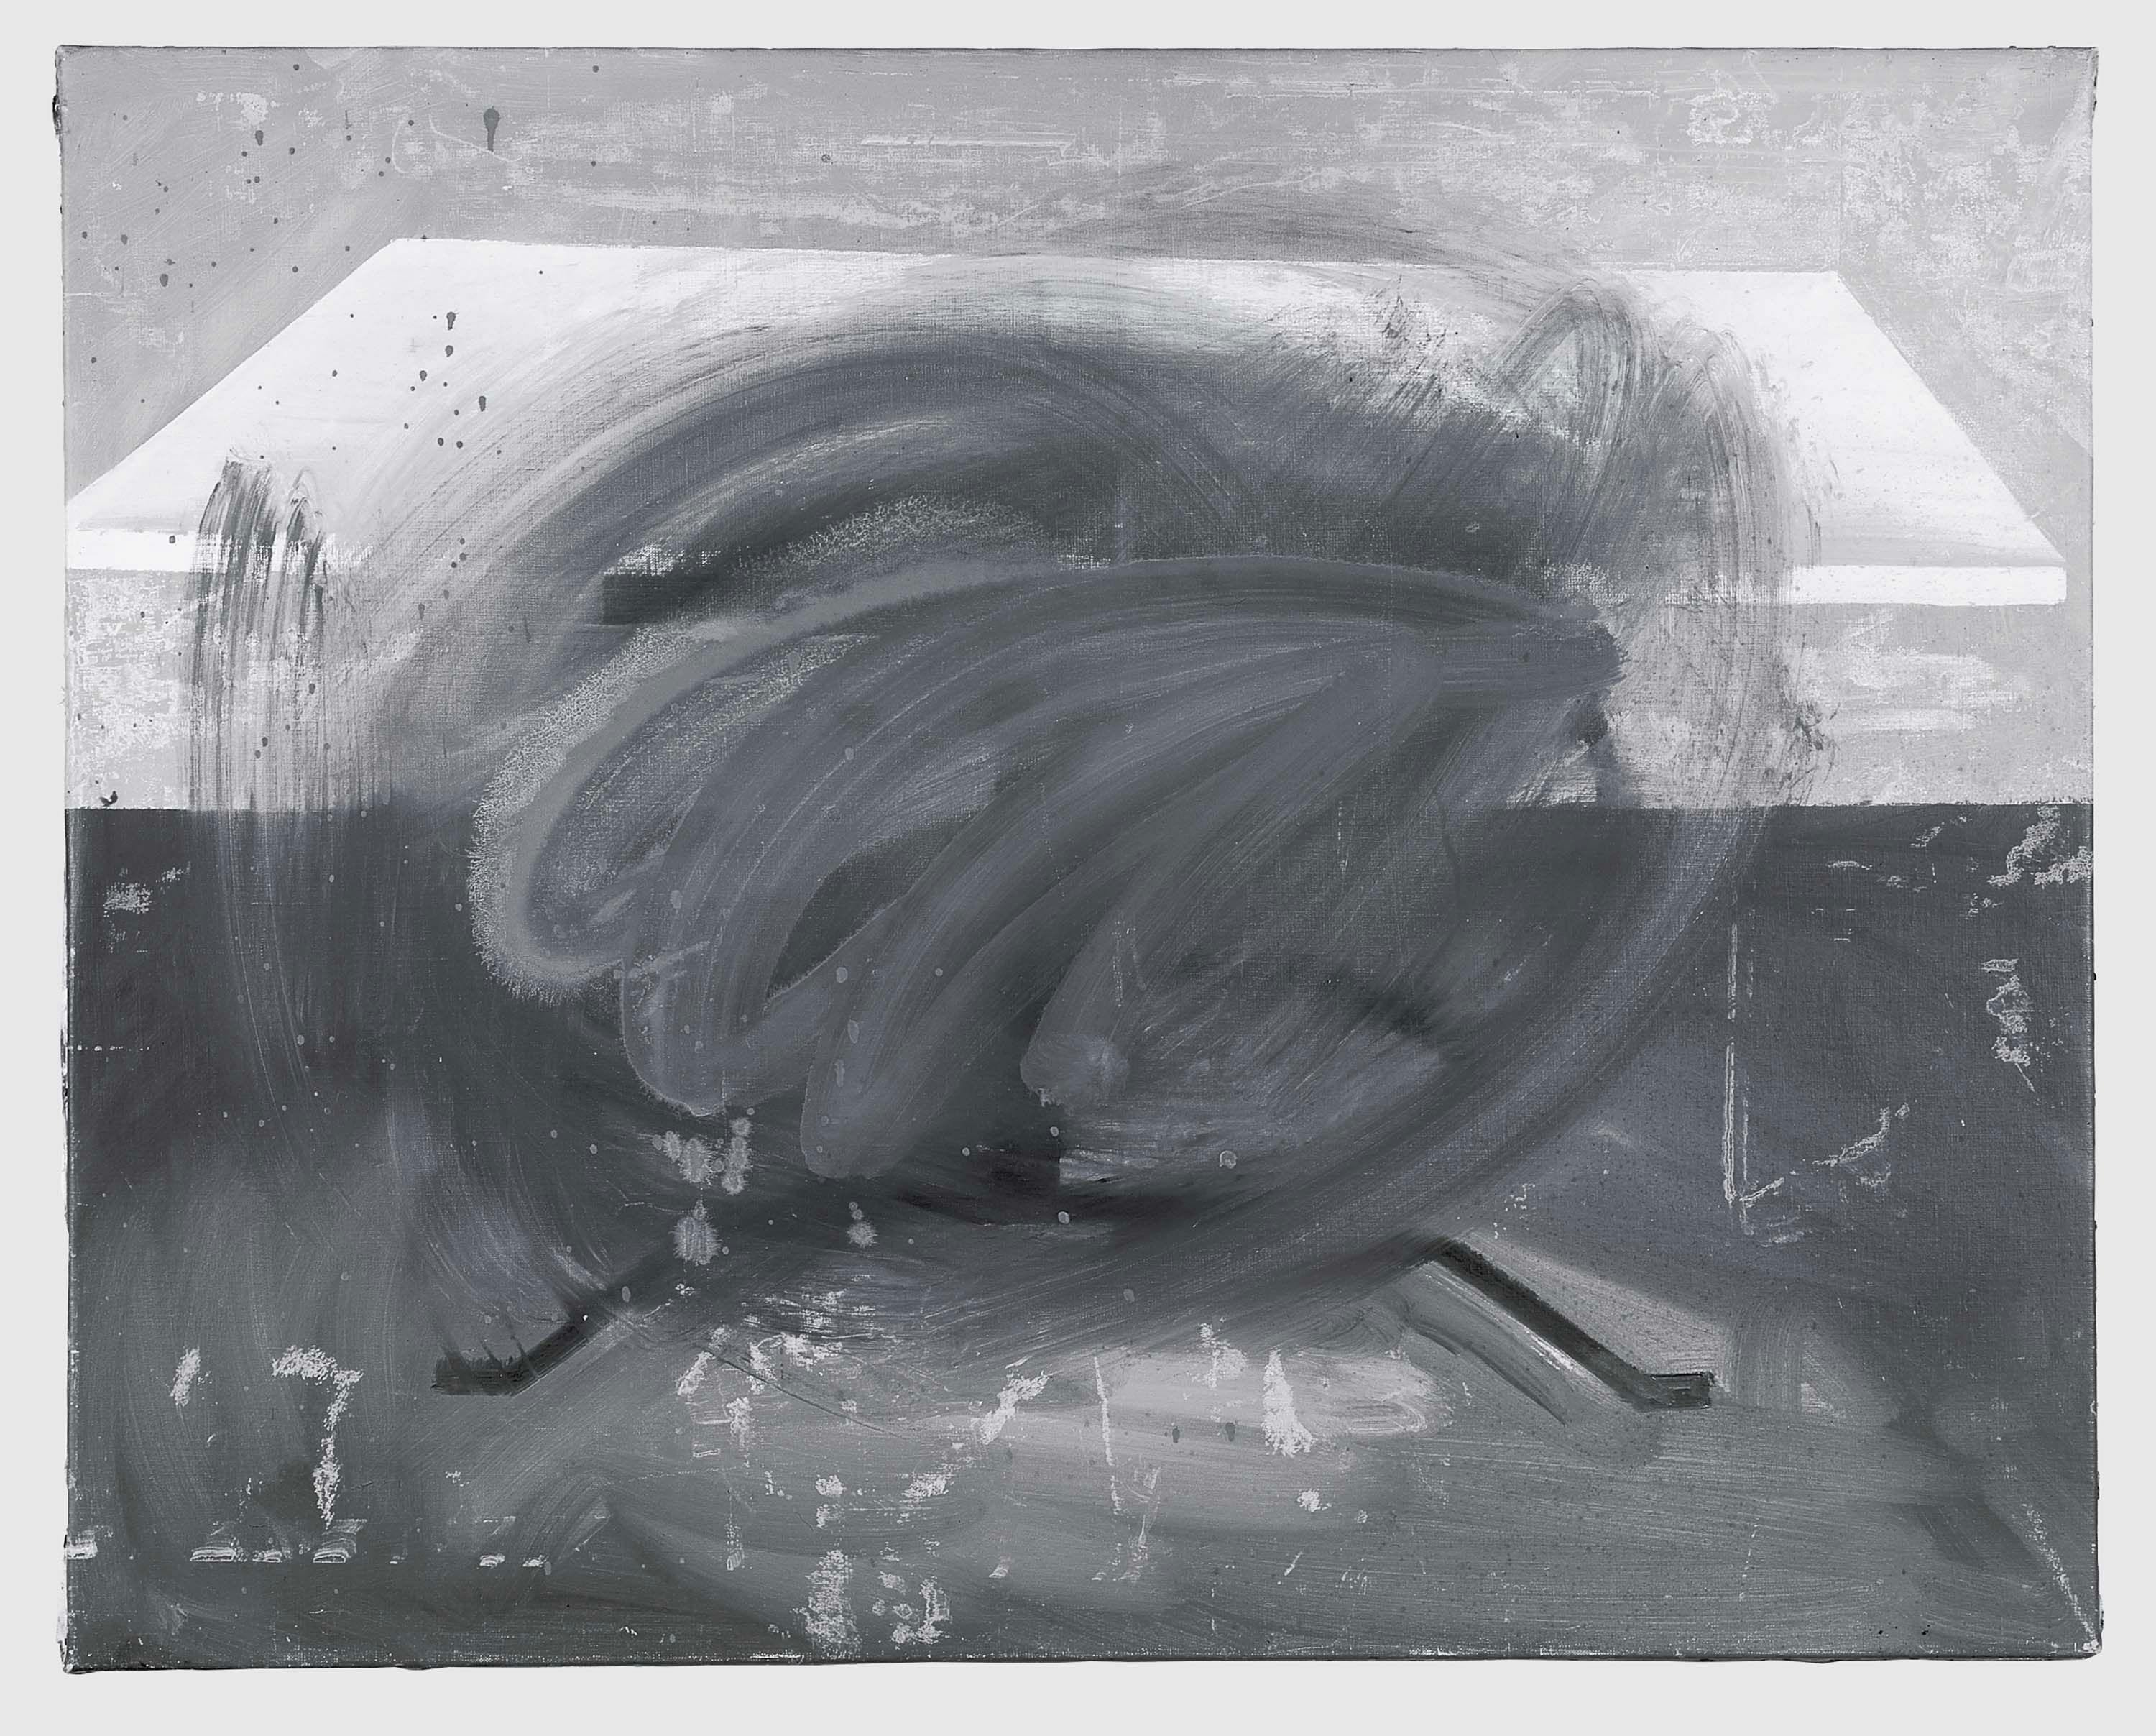 A painting by Gerhard Richter, titled Tisch (Table), dated 1962.